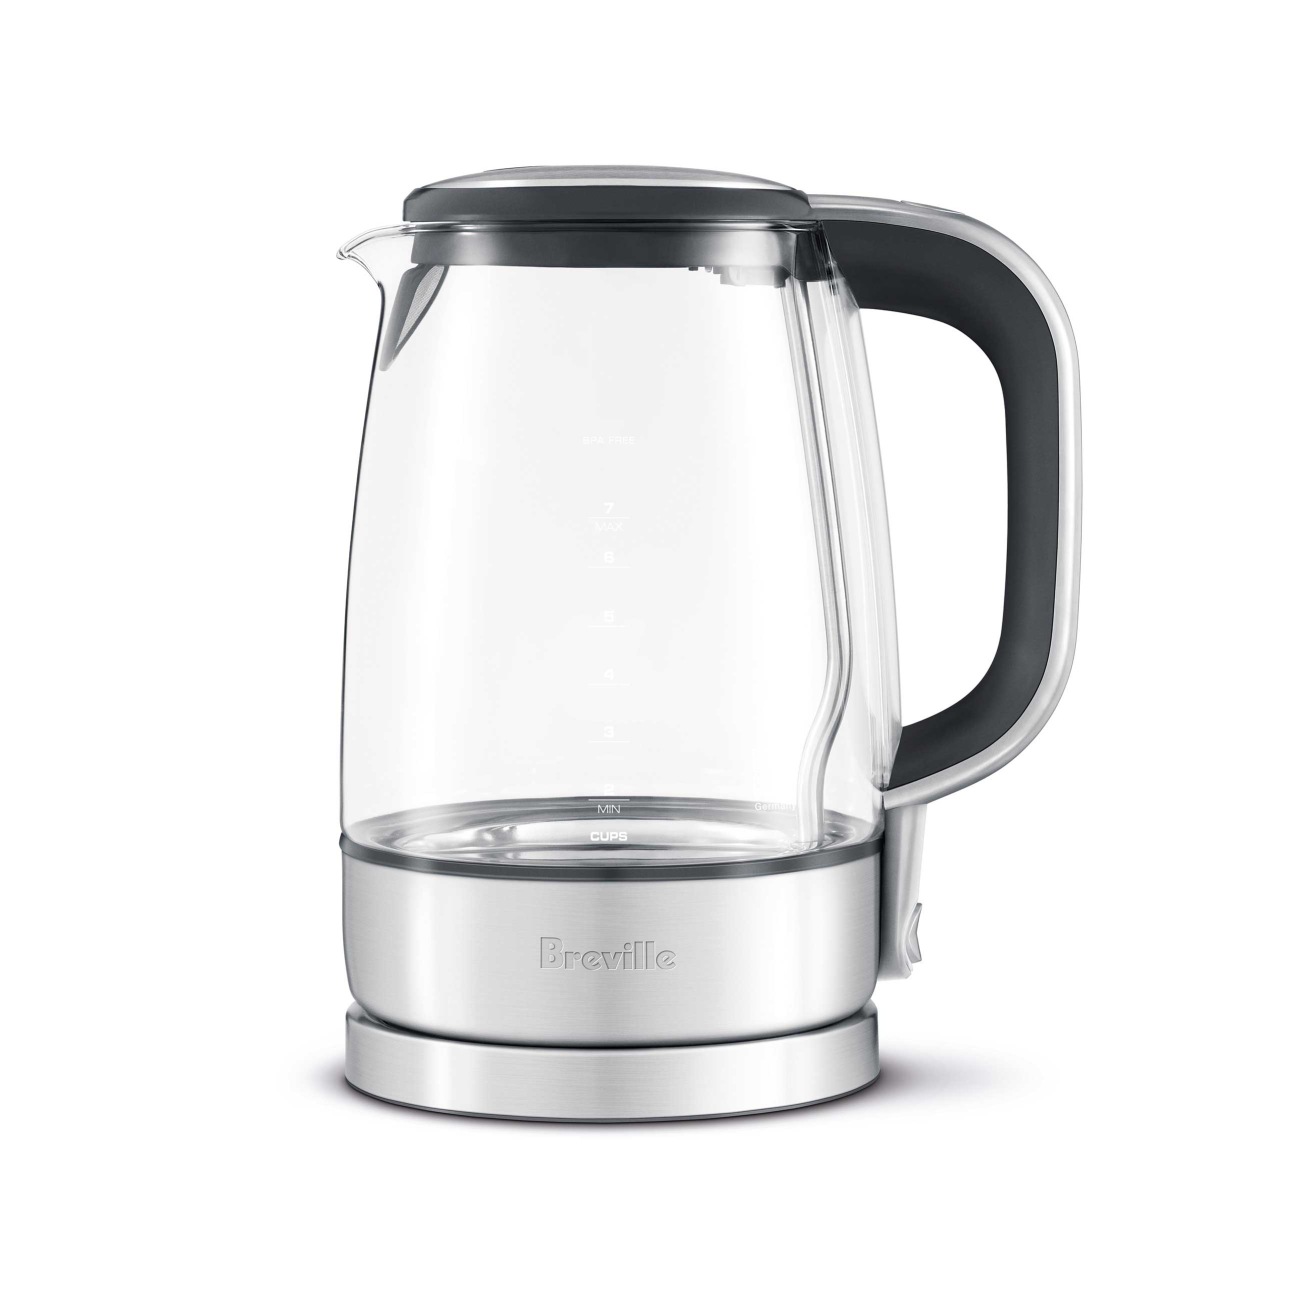 ZoomLand kettle electric kettle household transparent glass kettle hea